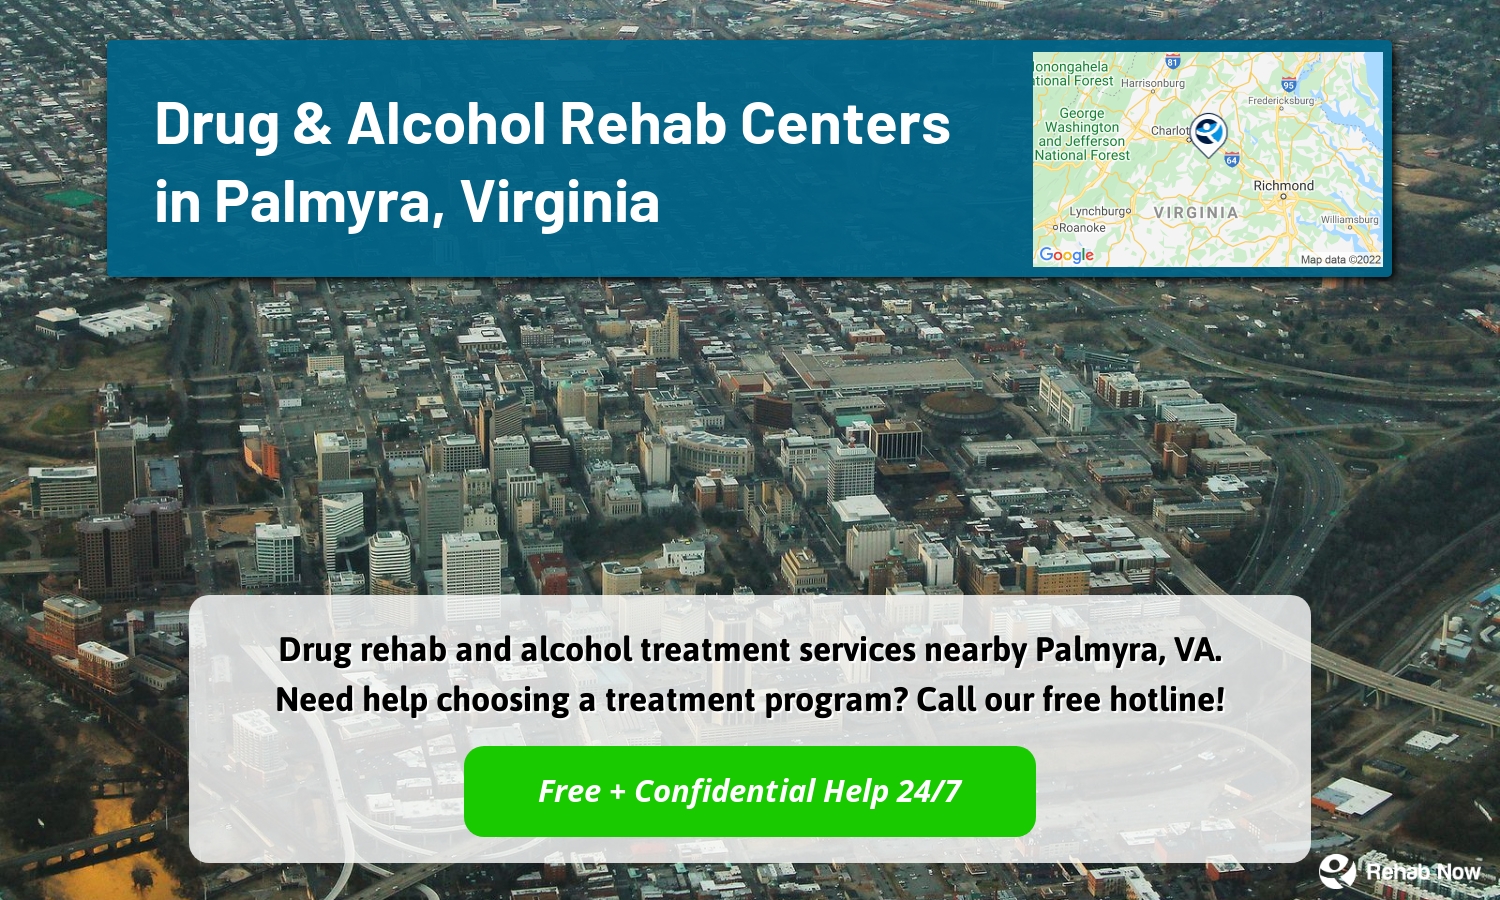 Drug rehab and alcohol treatment services nearby Palmyra, VA. Need help choosing a treatment program? Call our free hotline!